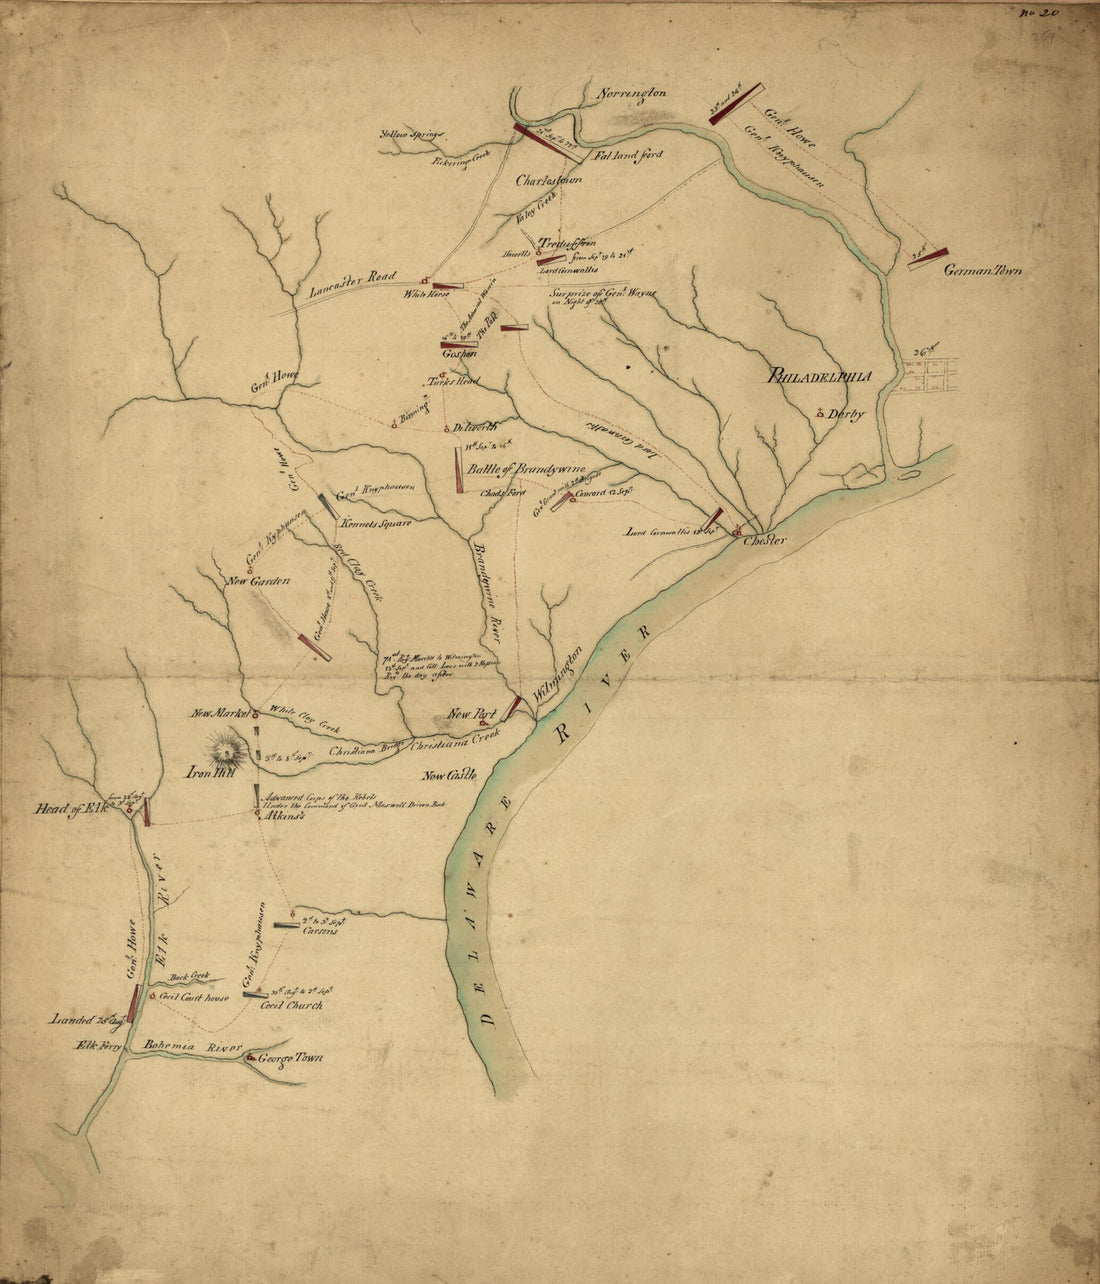 This old map of Operations of the British Army, from the 25th August to 26th Sept. from 1777 was created by John Montrésor in 1777